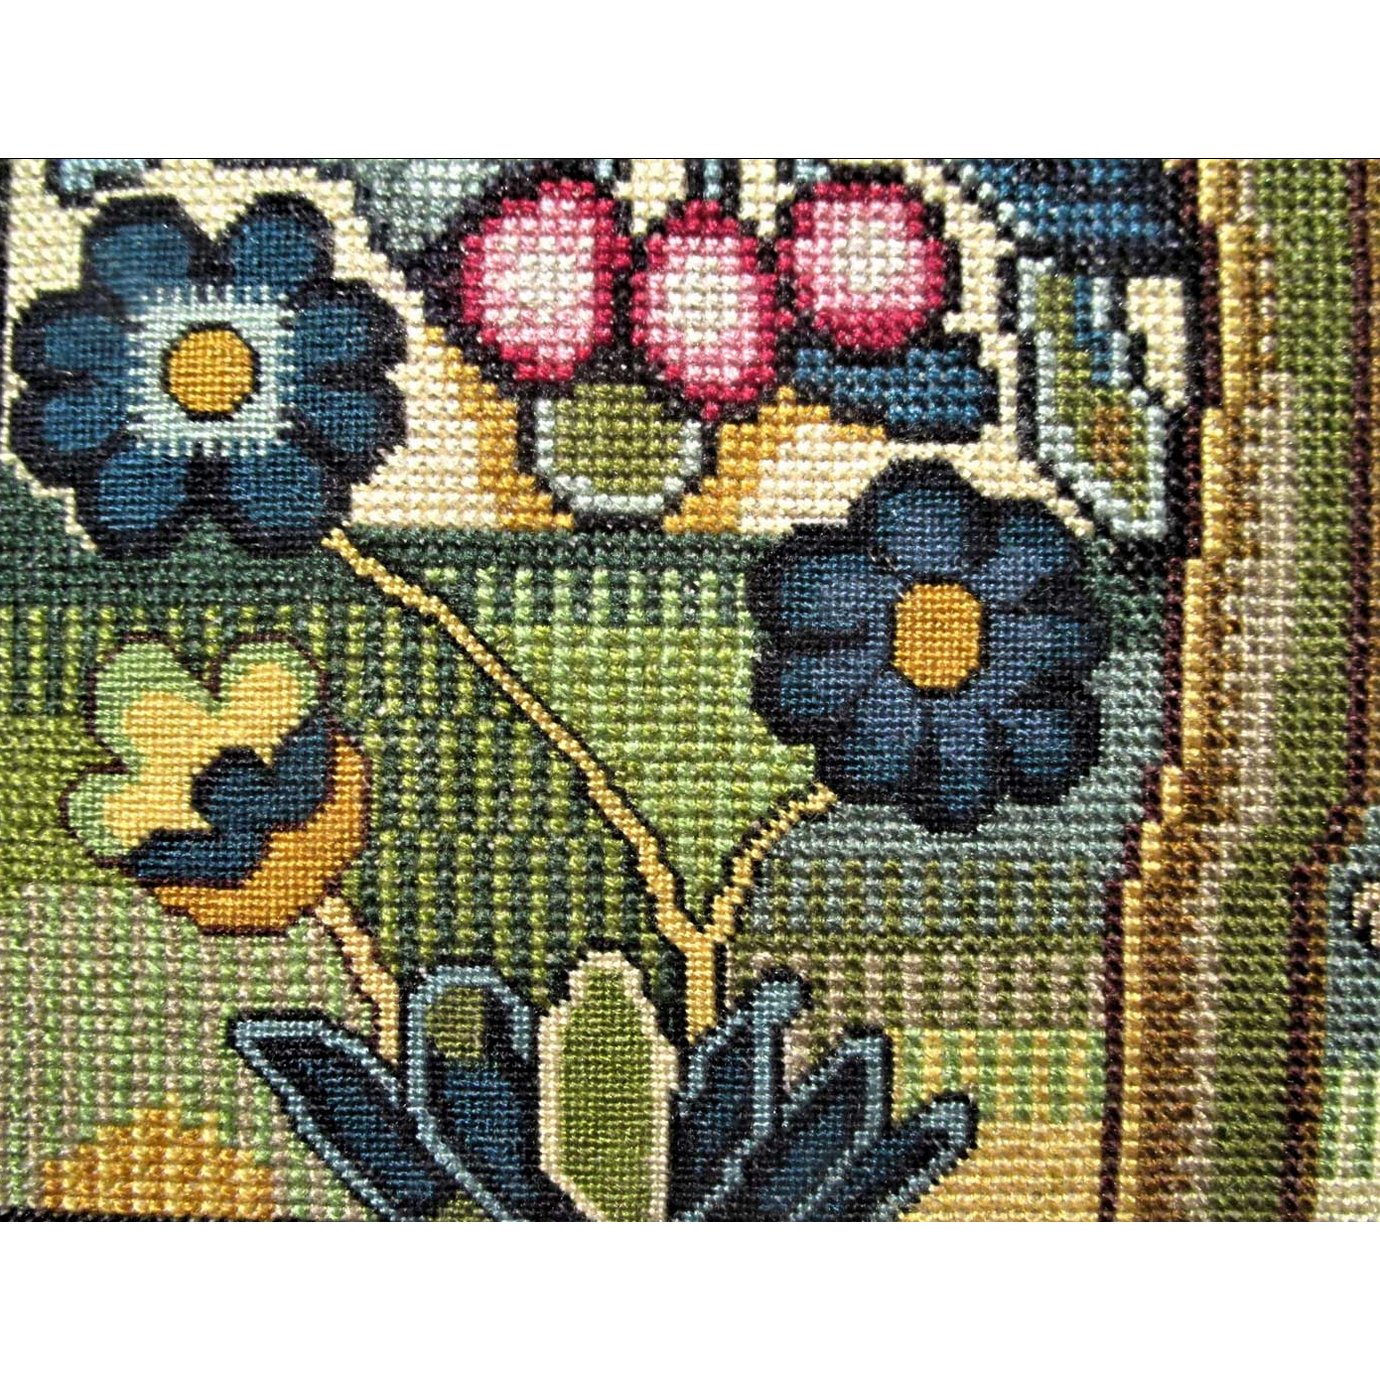 The Scarlet Letter ~ Fruit Tree with Two Animals circa 1690 Reproduction Sampler Pattern